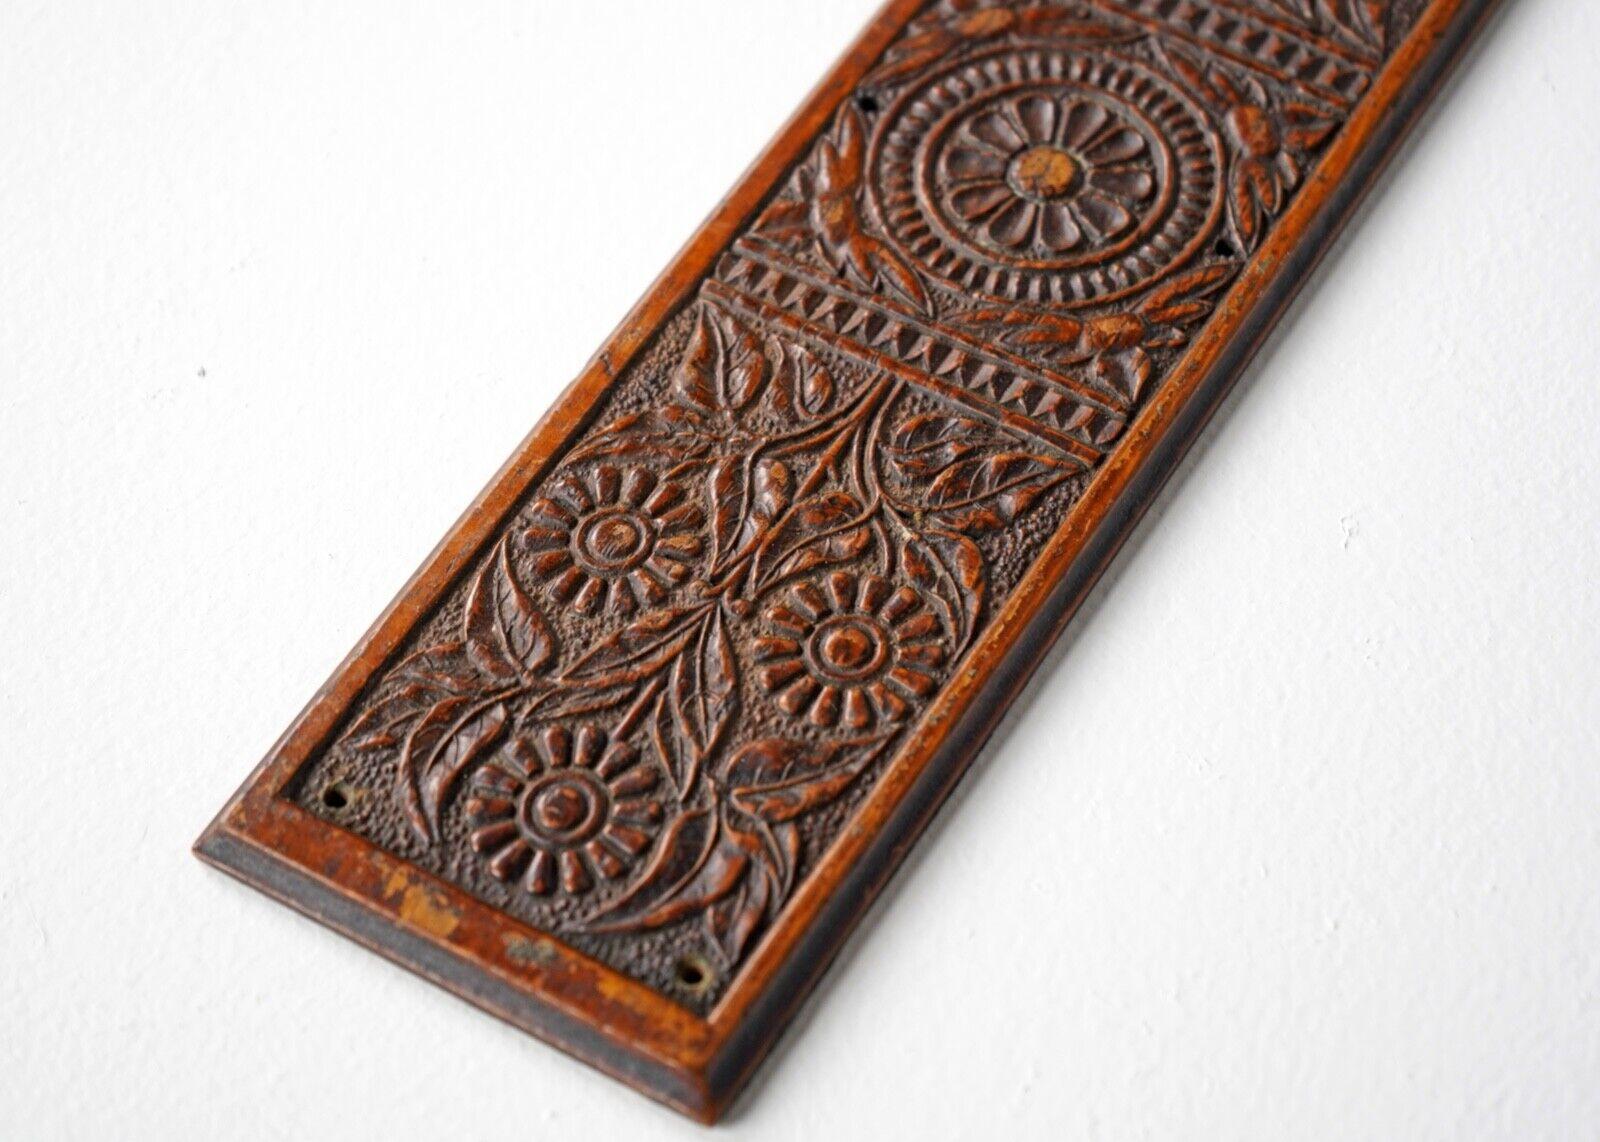 19th Century Antique William Morris Style Wooden Hand Carved Finger Plates Door Push Panels